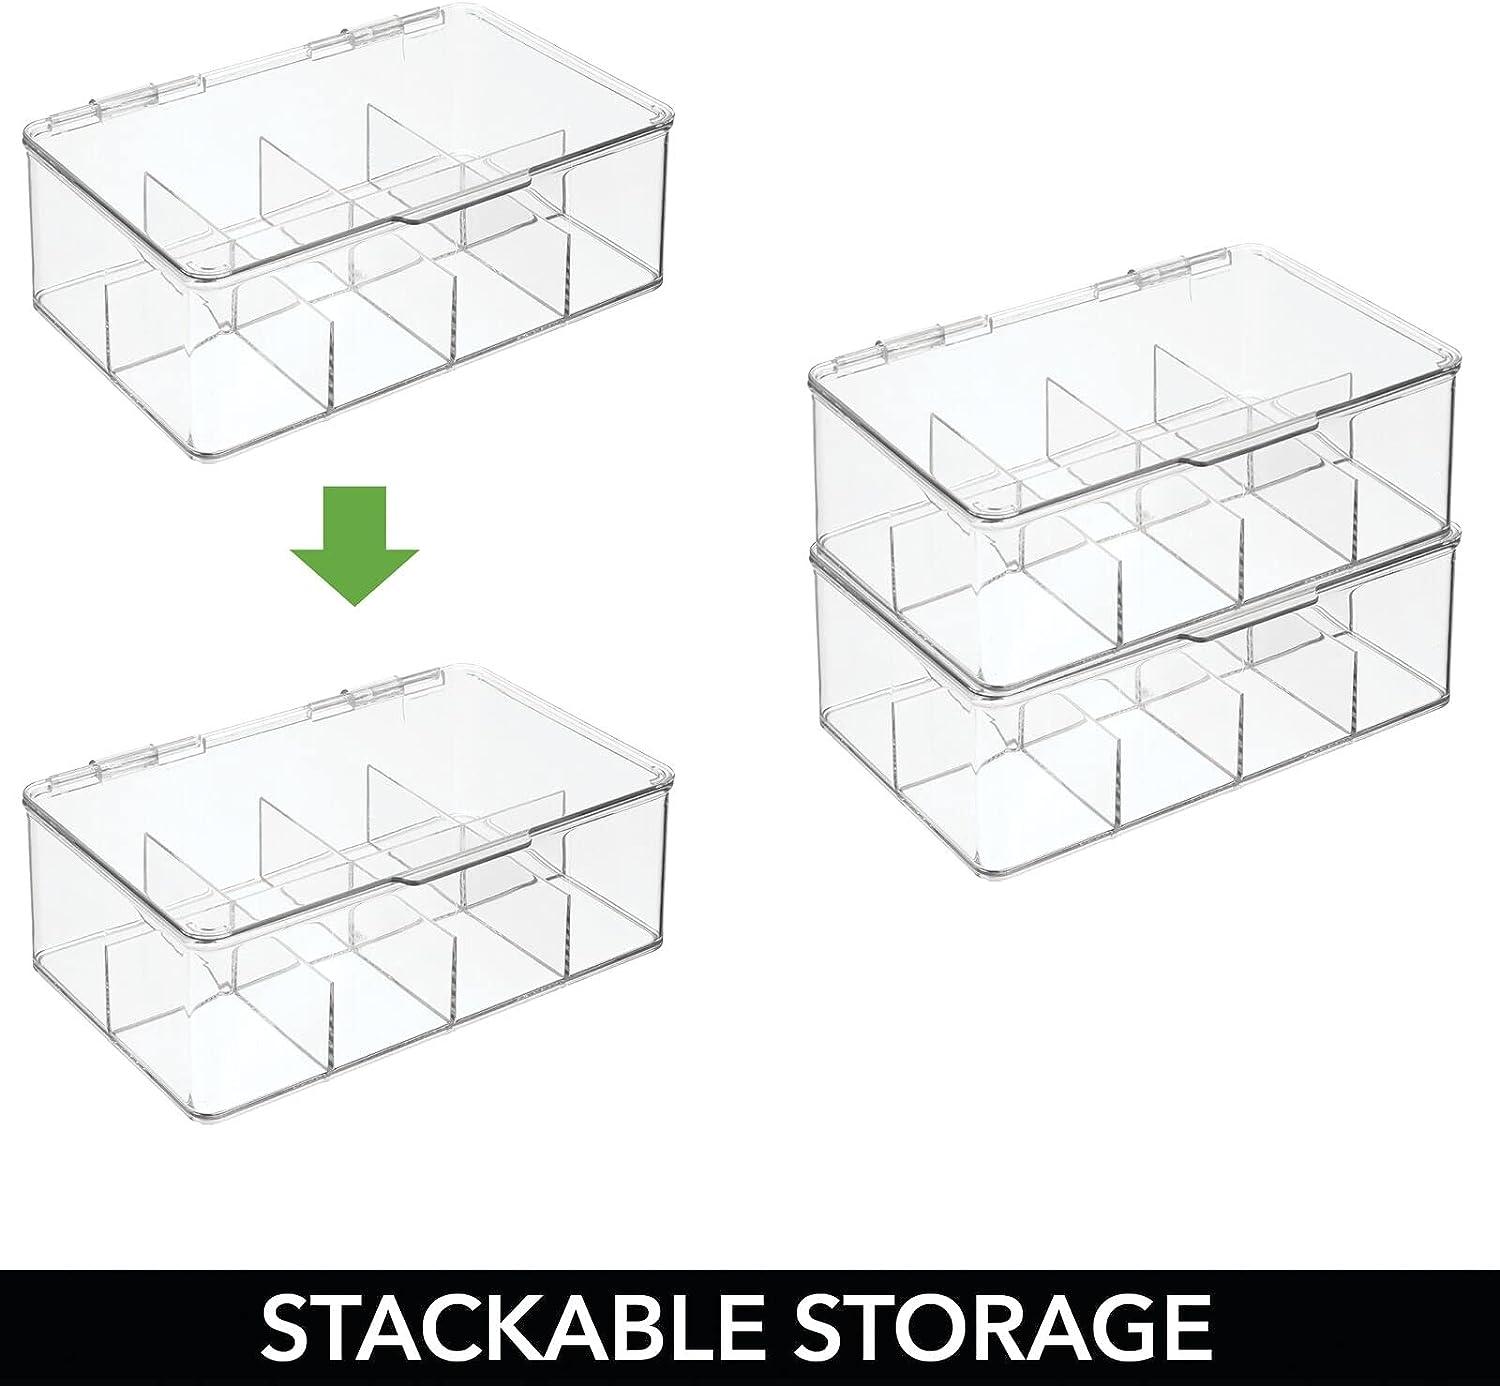 8 Section Large Stacking Hair Accessory Storage Box - 7.25 x